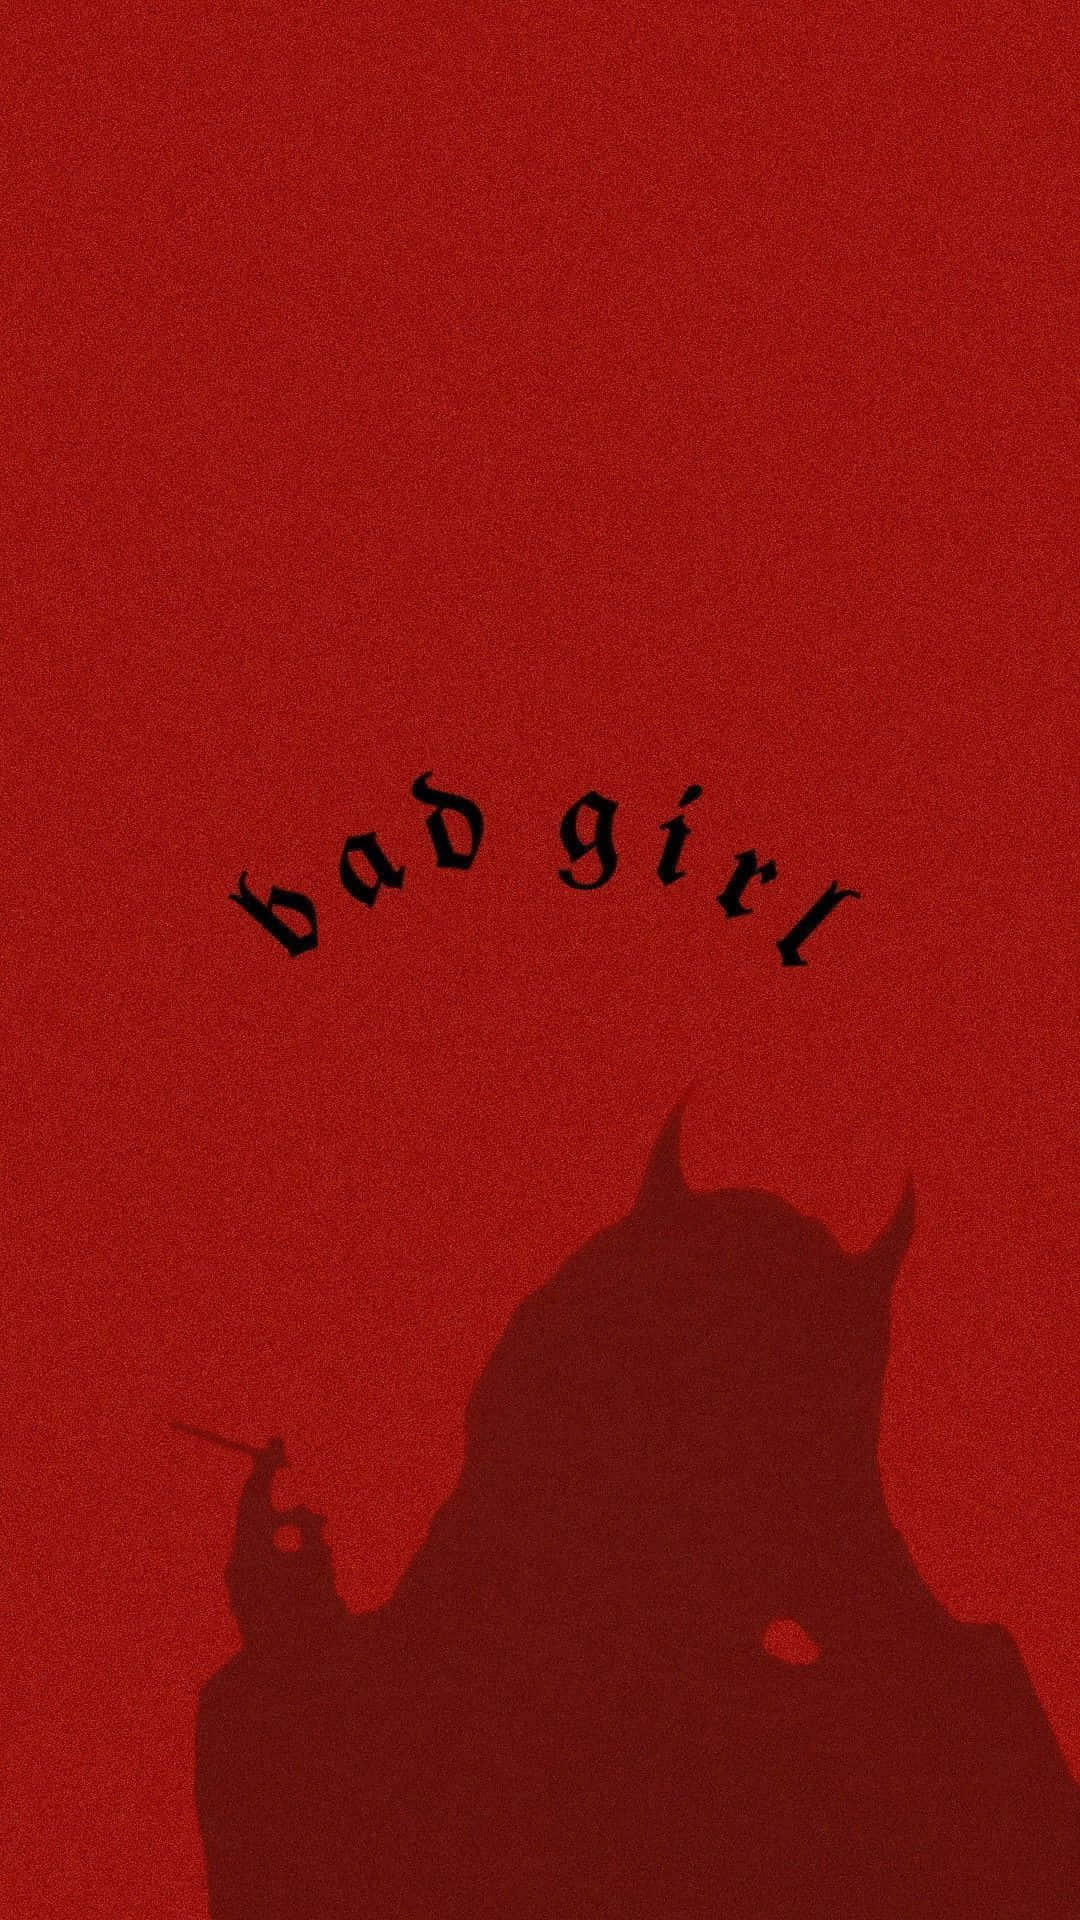 Bad Girl - A Devil Silhouette On A Red Background